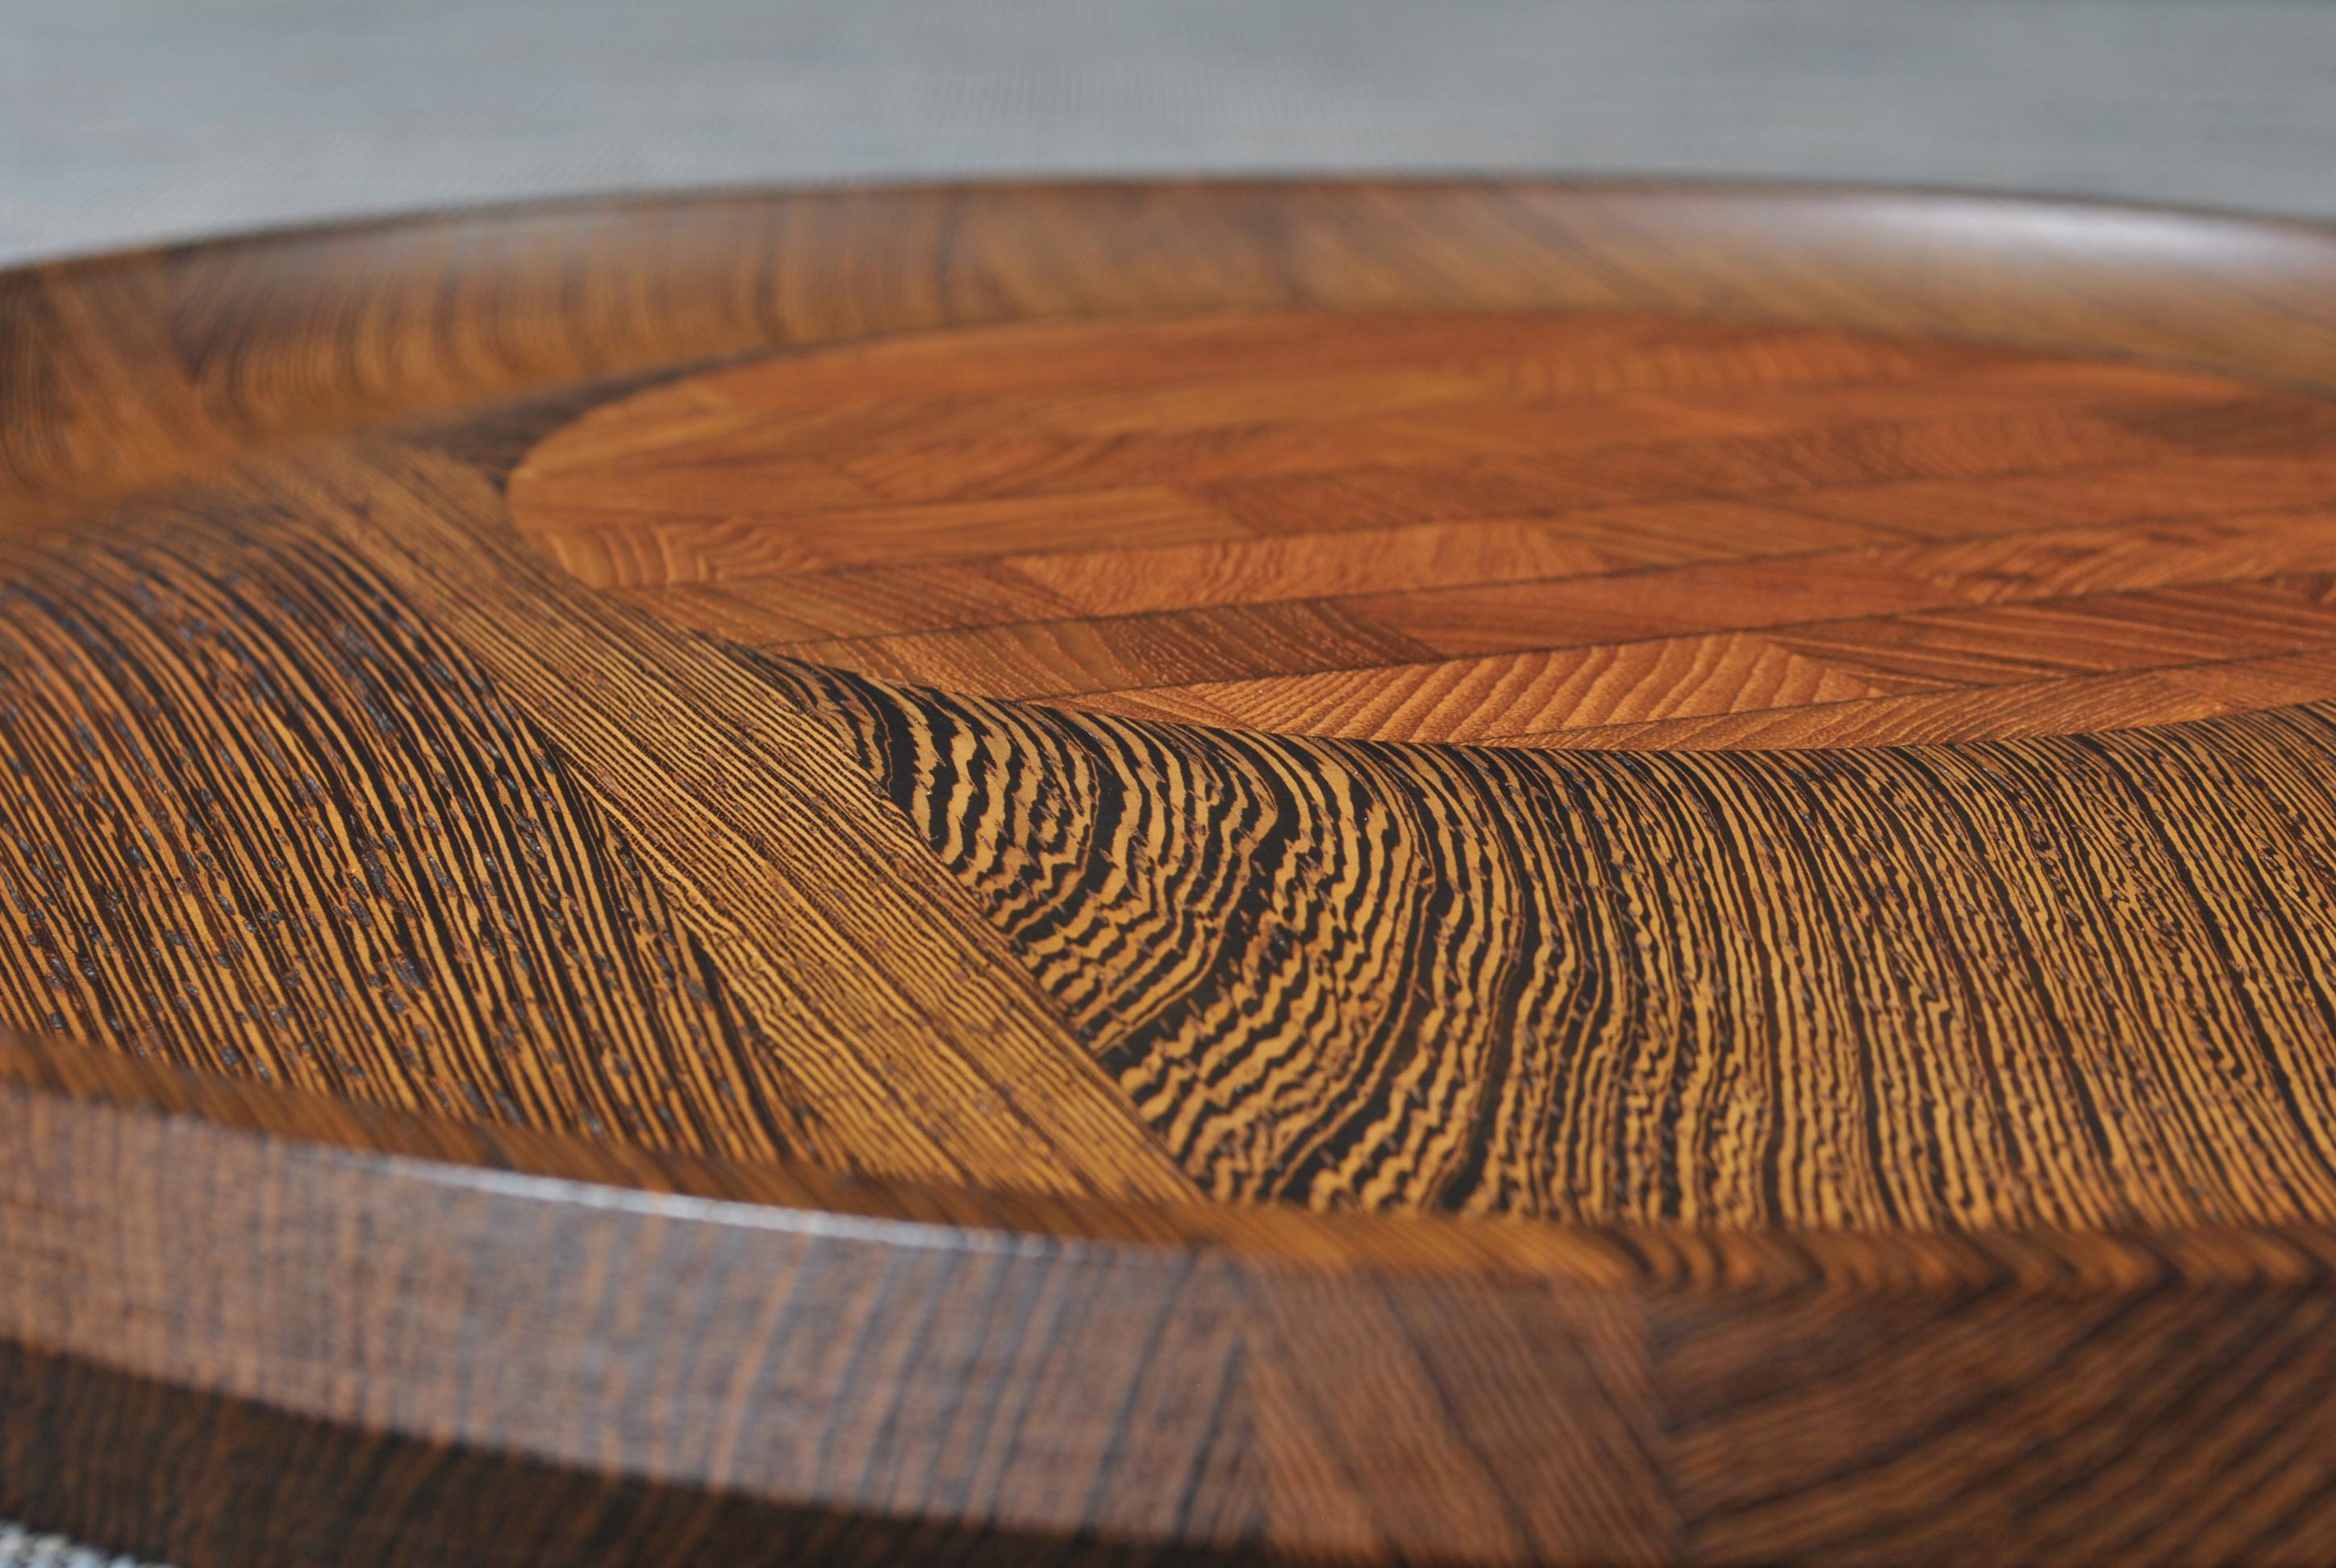 A very rare platter - presentation board by Jens Harald Quistgaard. Beautifully turned Wenge timber with circular raised centre in squared end grain and concave base. Produced in Denmark, circa 1960. Incredible craftsmanship.
In lovely condition -